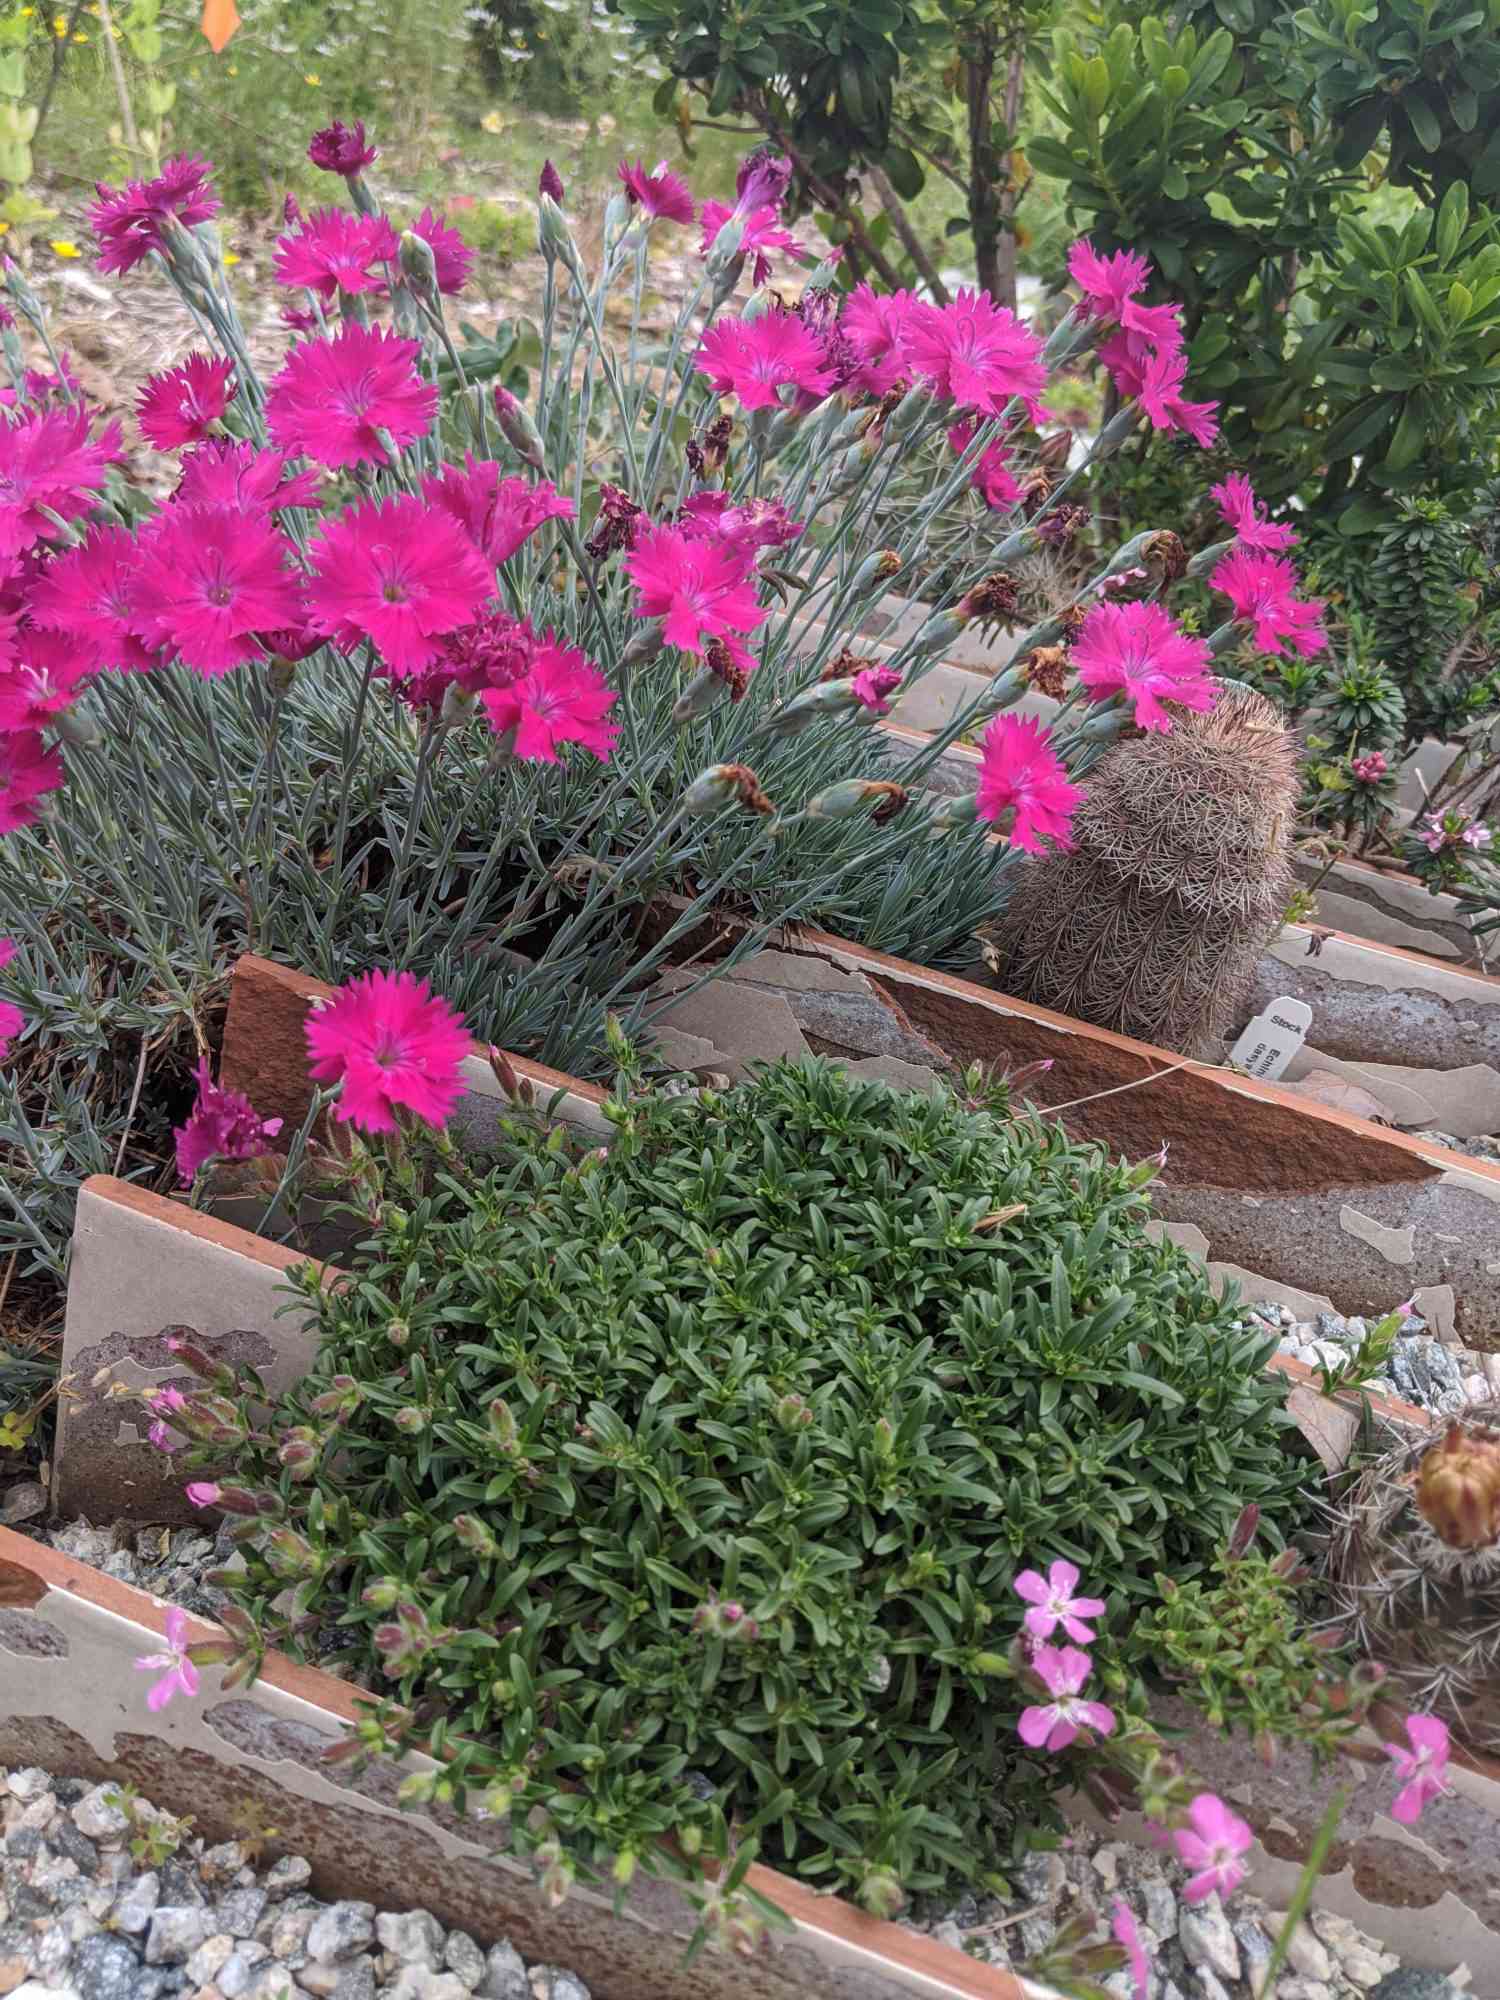 Alpine versions of dianthus create dense mounds of silver foliage with pink blooms